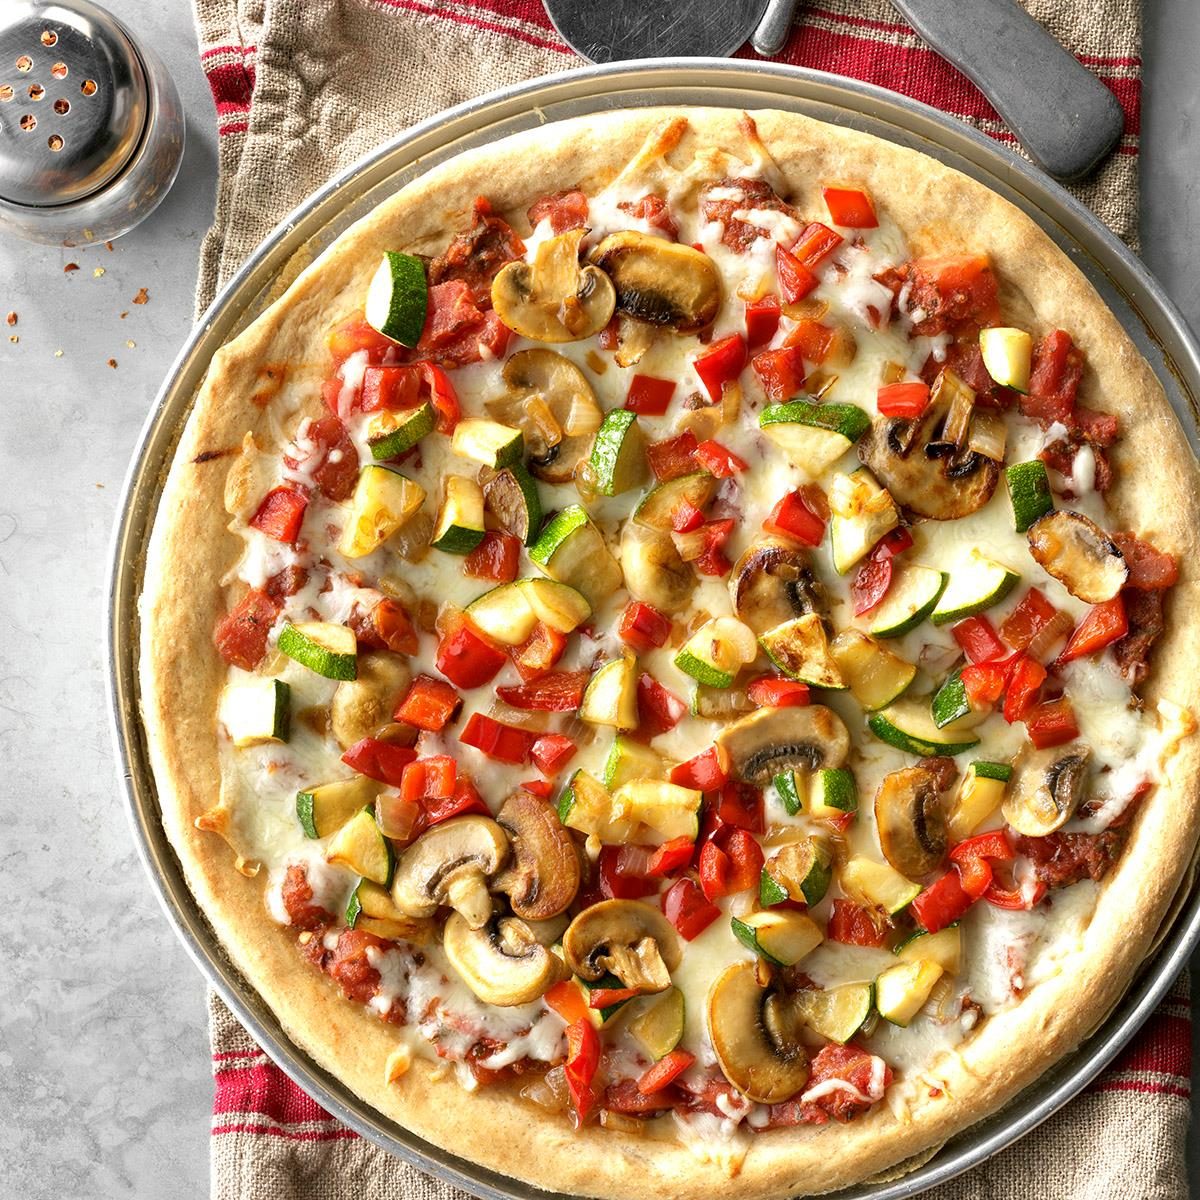 Wheat Pizza Recipe: How to Make It